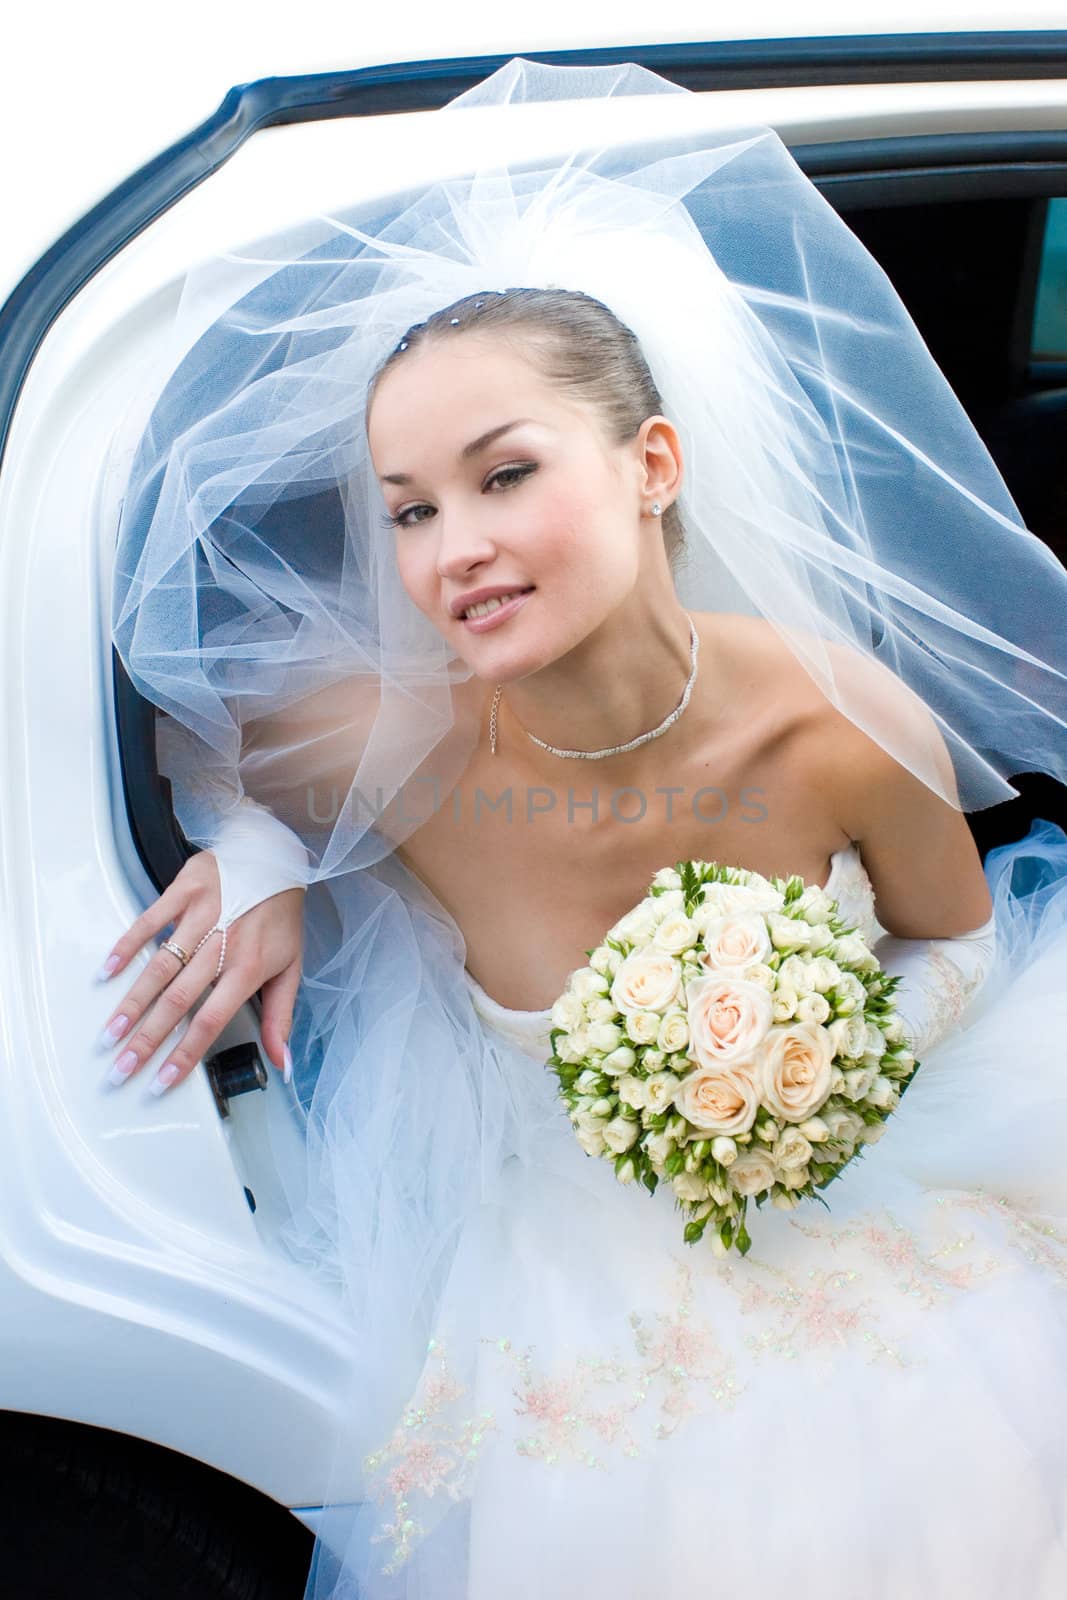 bride in the car with flowers by vsurkov